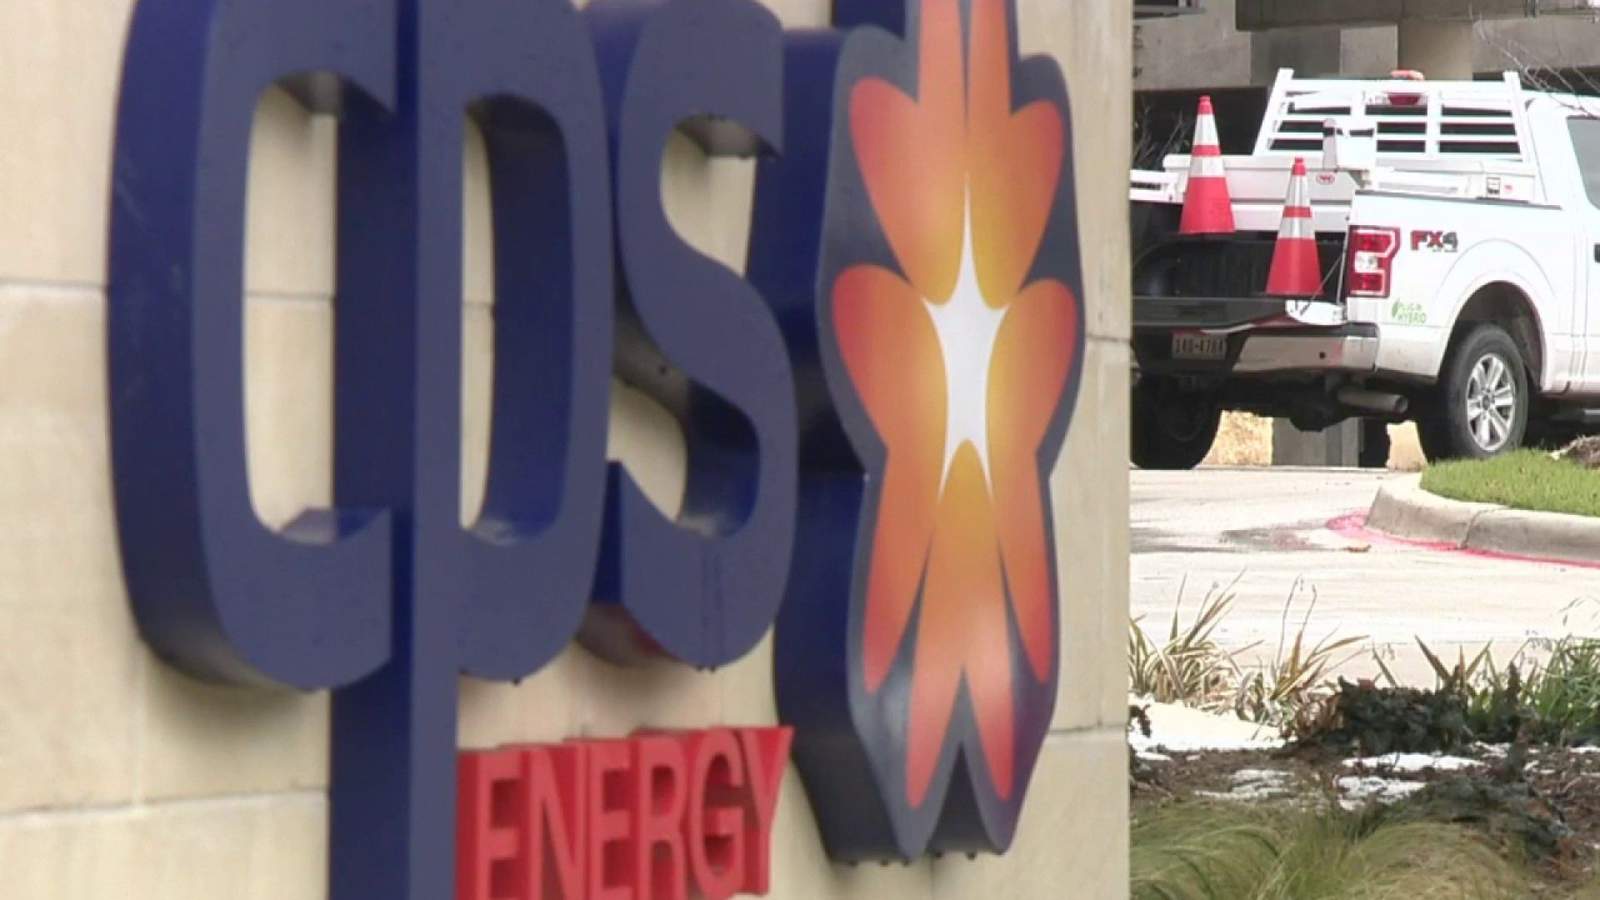 WATCH LIVE: CPS Energy provides winter storm recap at special board of trustees meeting